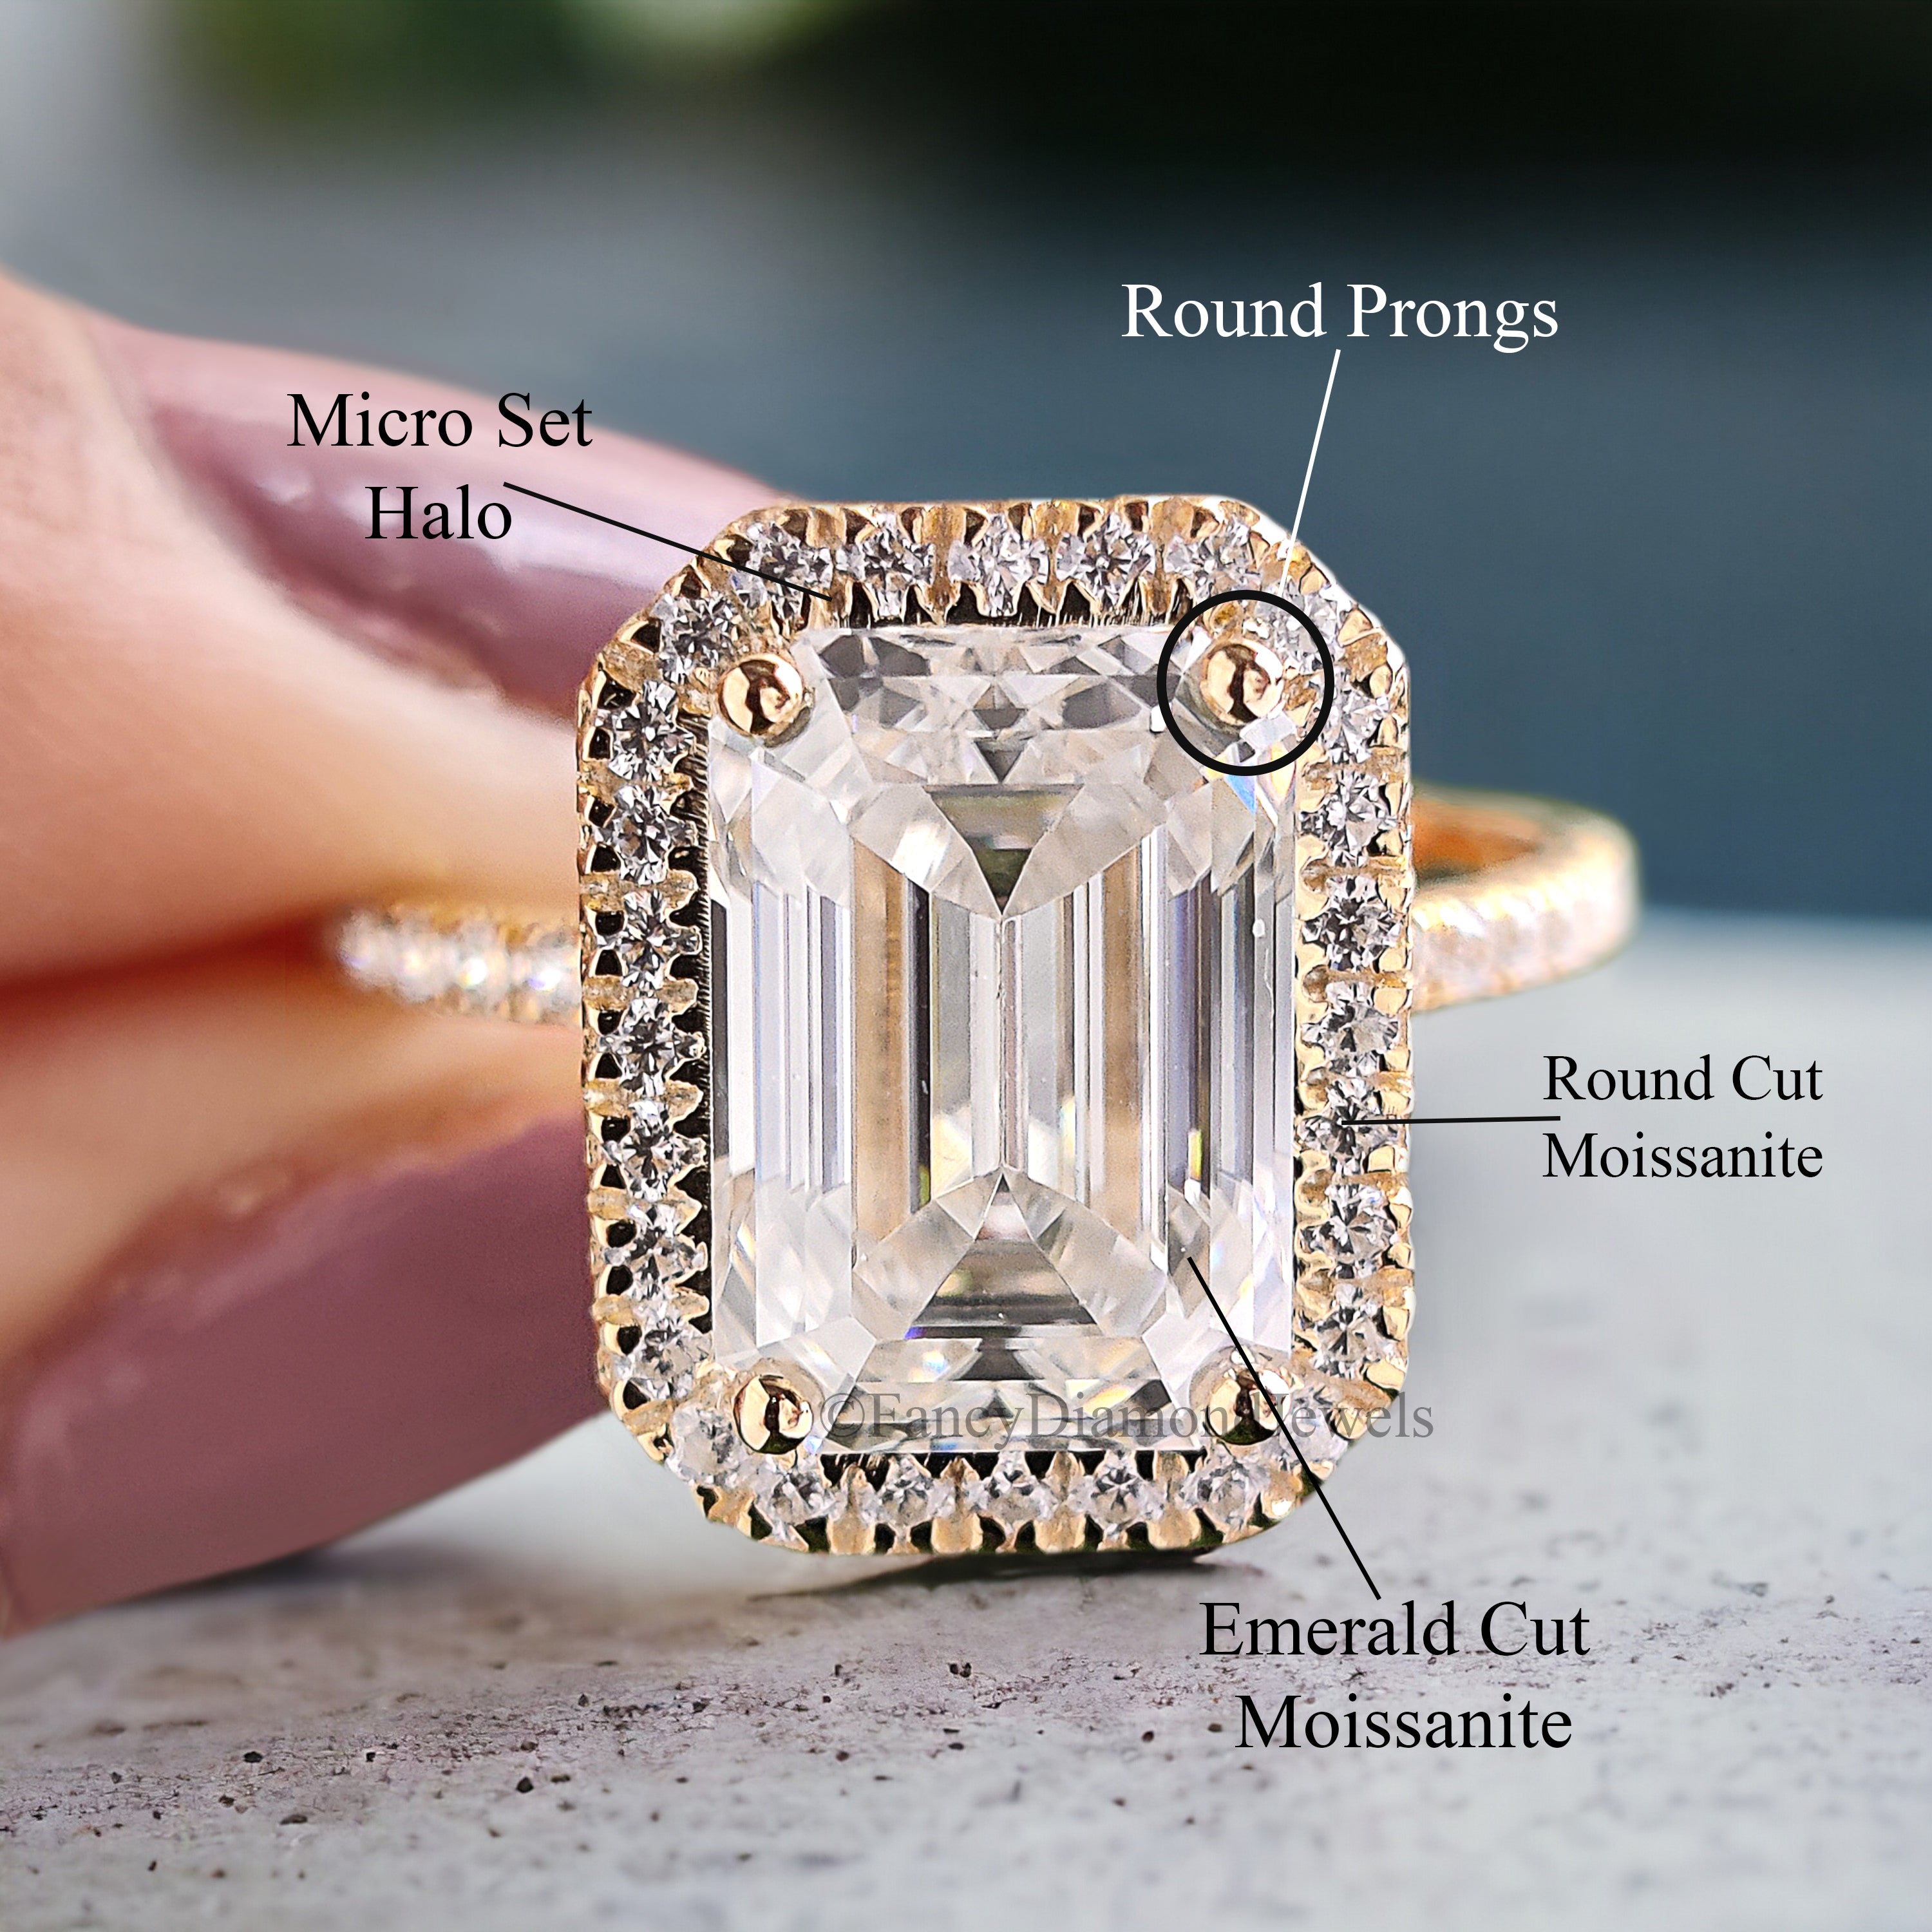 Emerald Cut Colorless Moissanite Engagement Ring 3.00 Ct Solid 14k Yellow Gold Ring Bridal Wedding Ring Halo Set Ring Gift For Her FD212